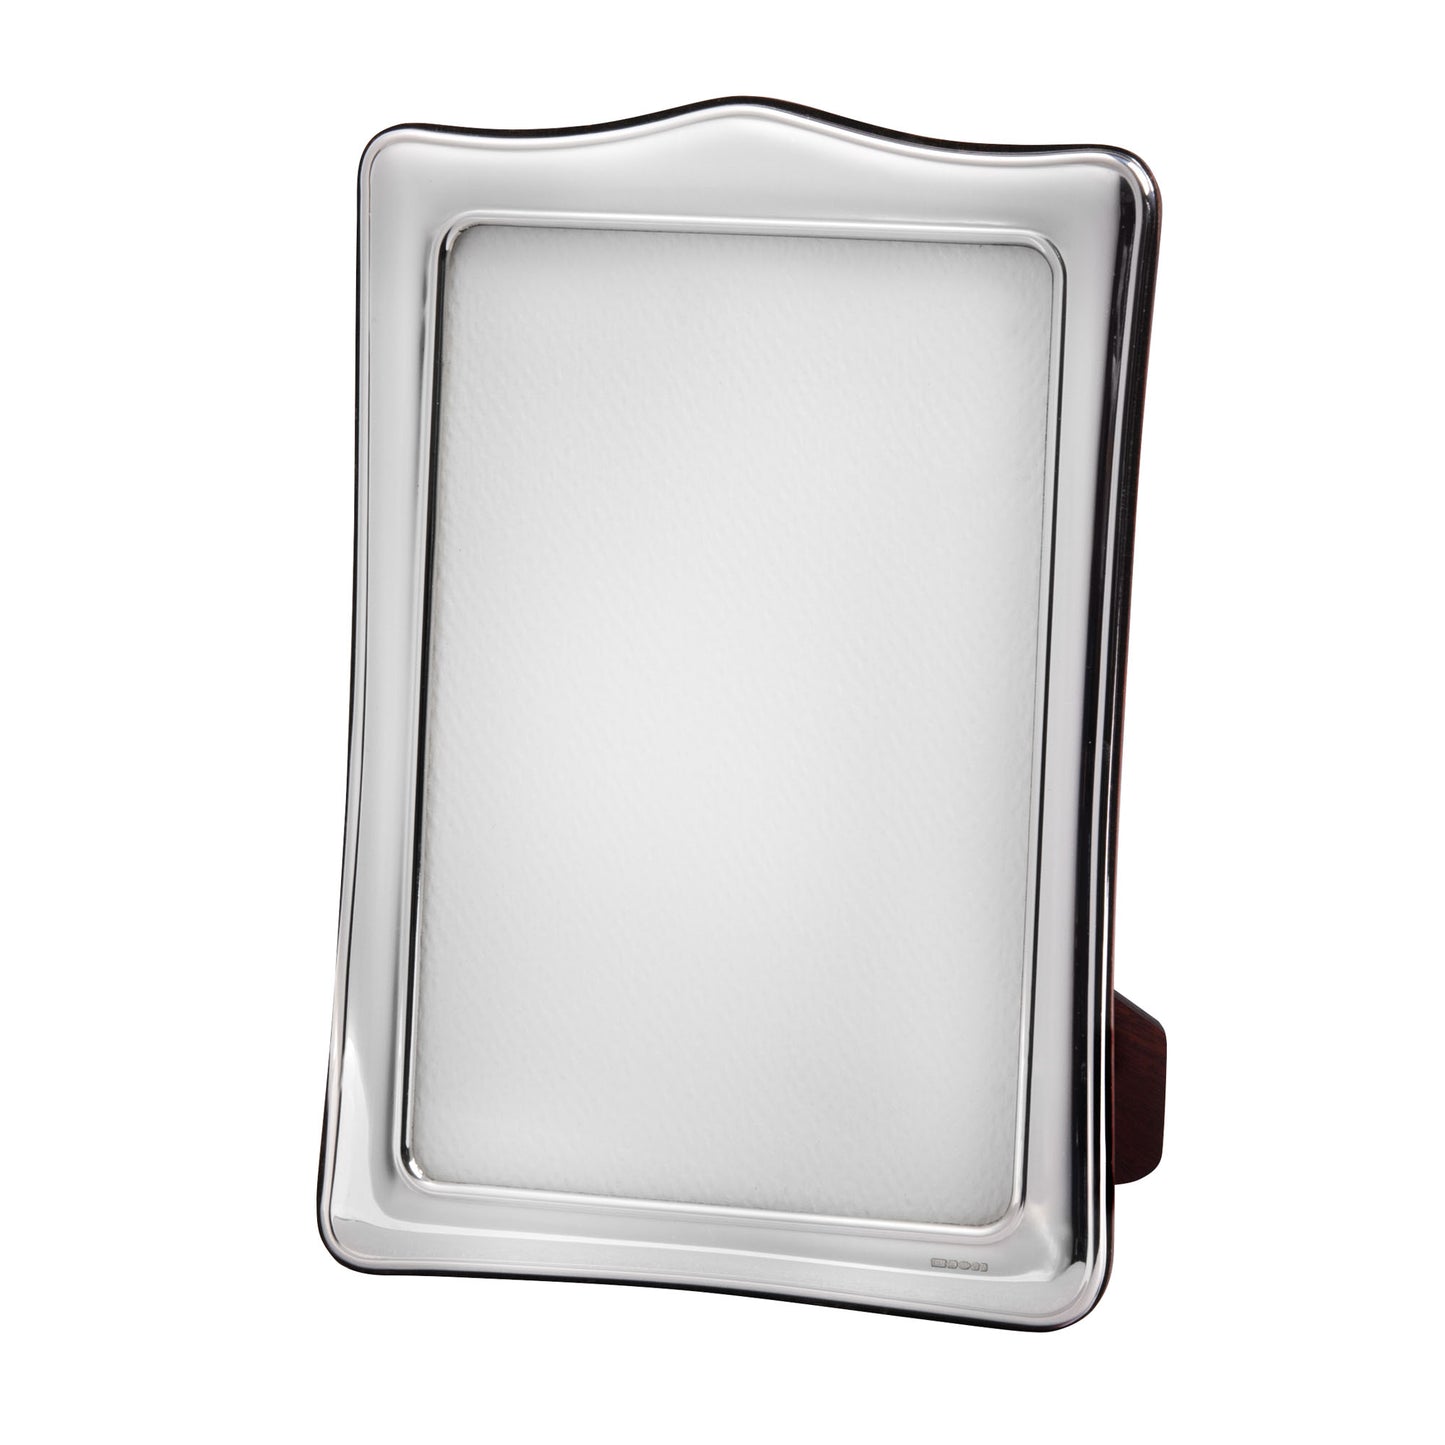 Silver 3.5 x 2.5" Frame With Wooden Back